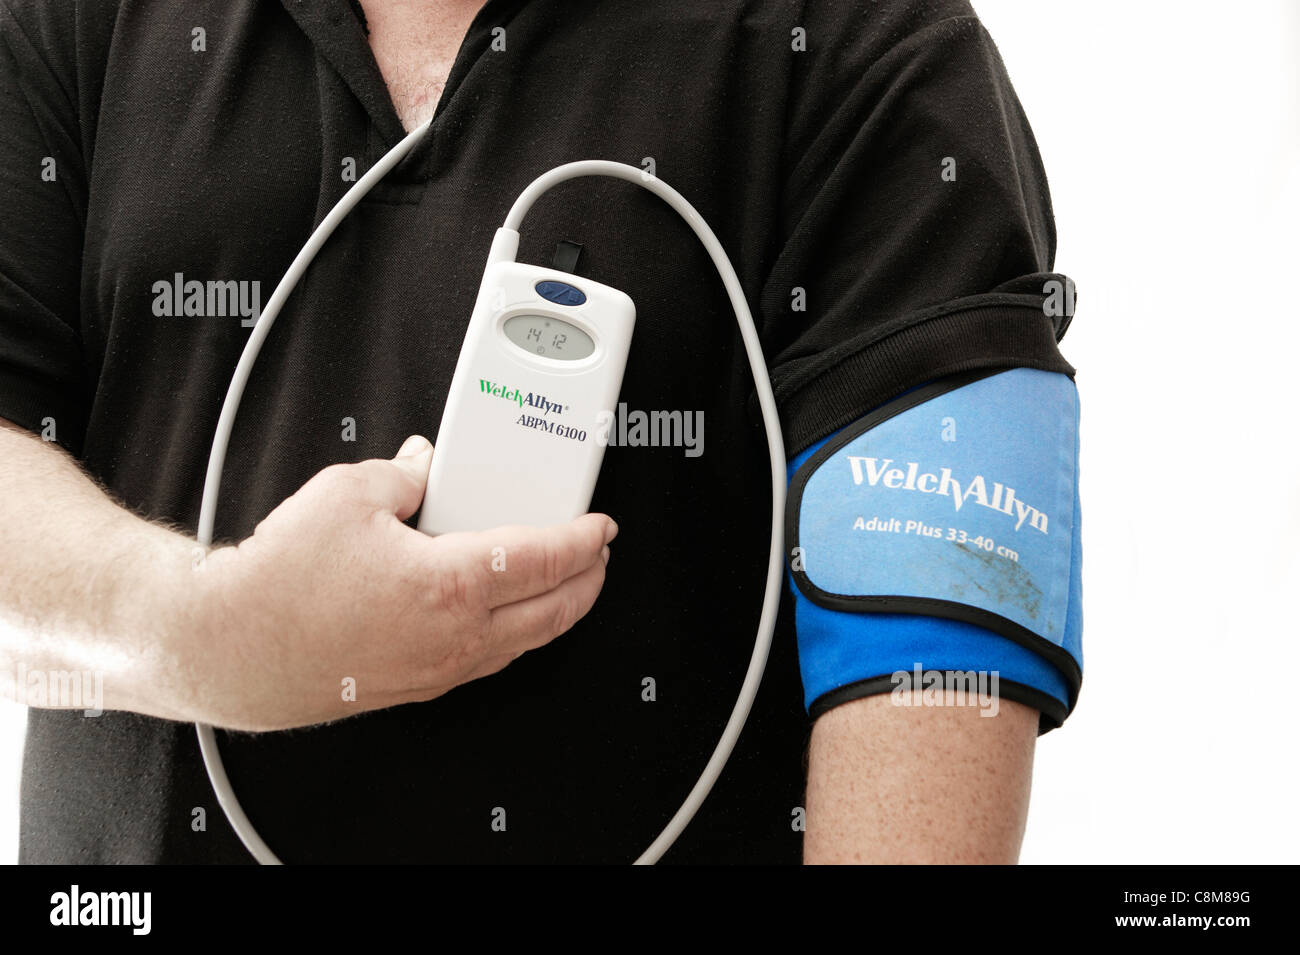 24 hour blood pressure monitoring - Stock Image - C016/7274